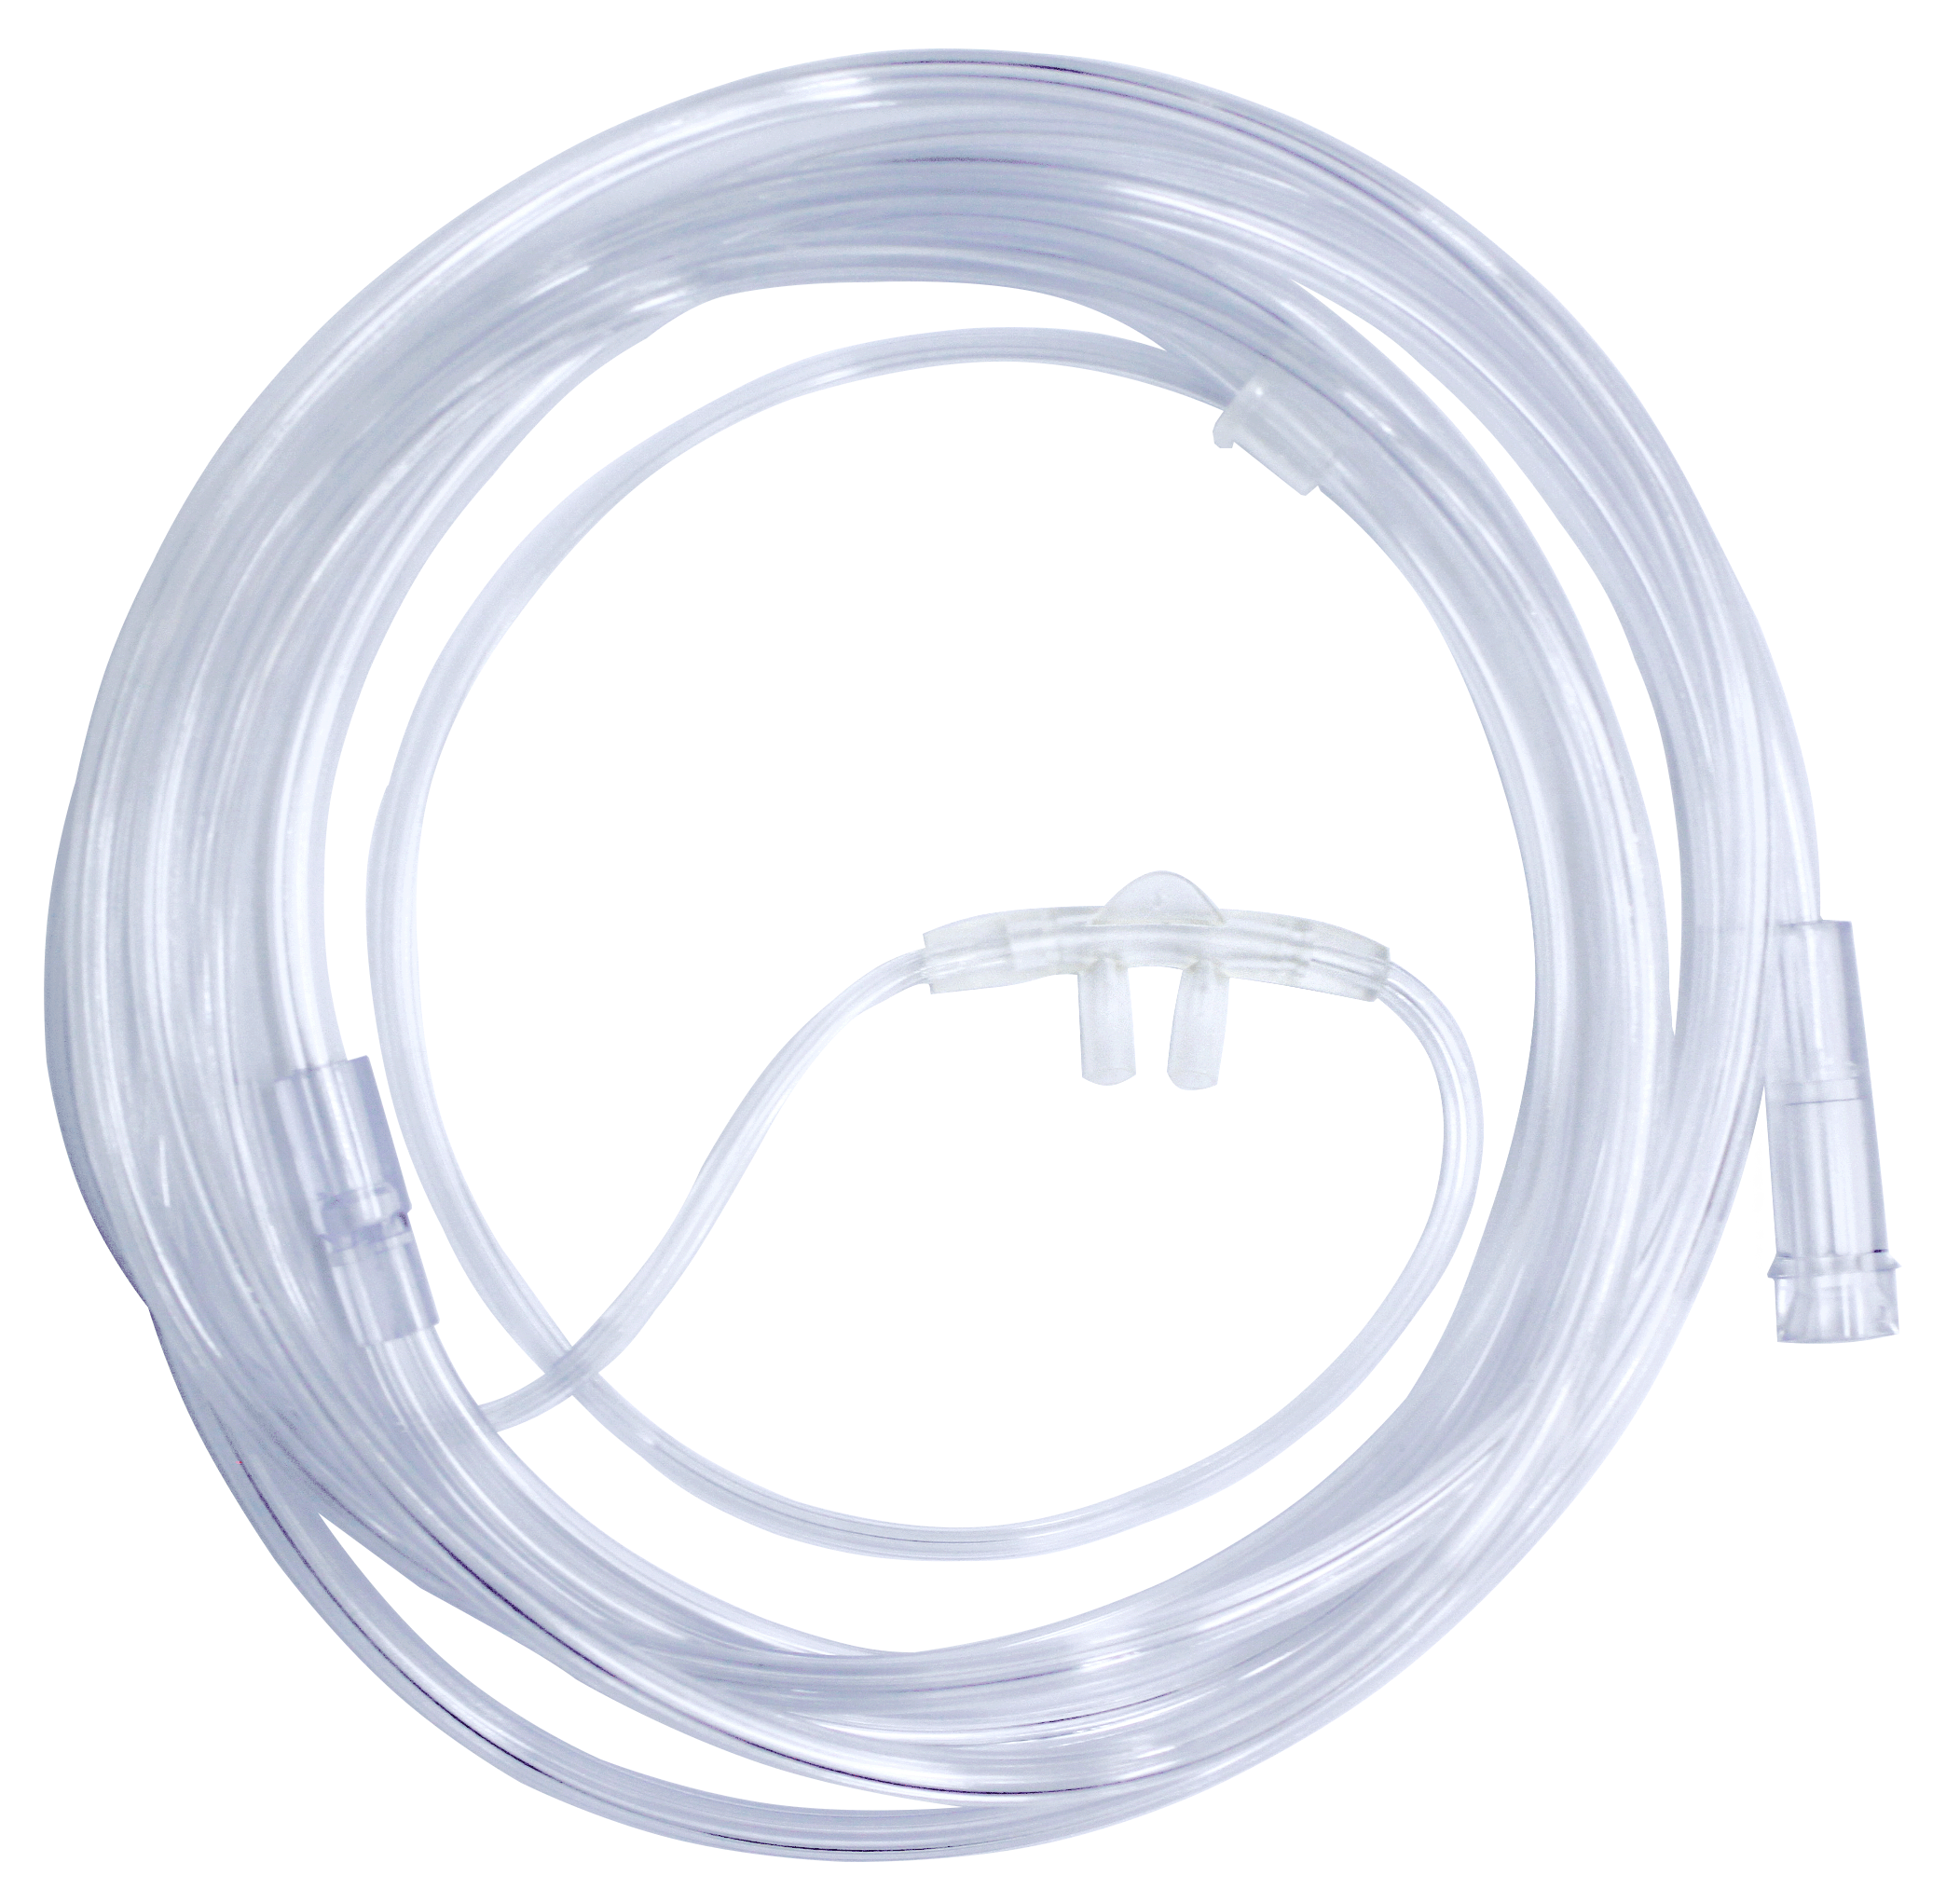 Disposable Nasal Oxygen Cannula (C010206 / Child)